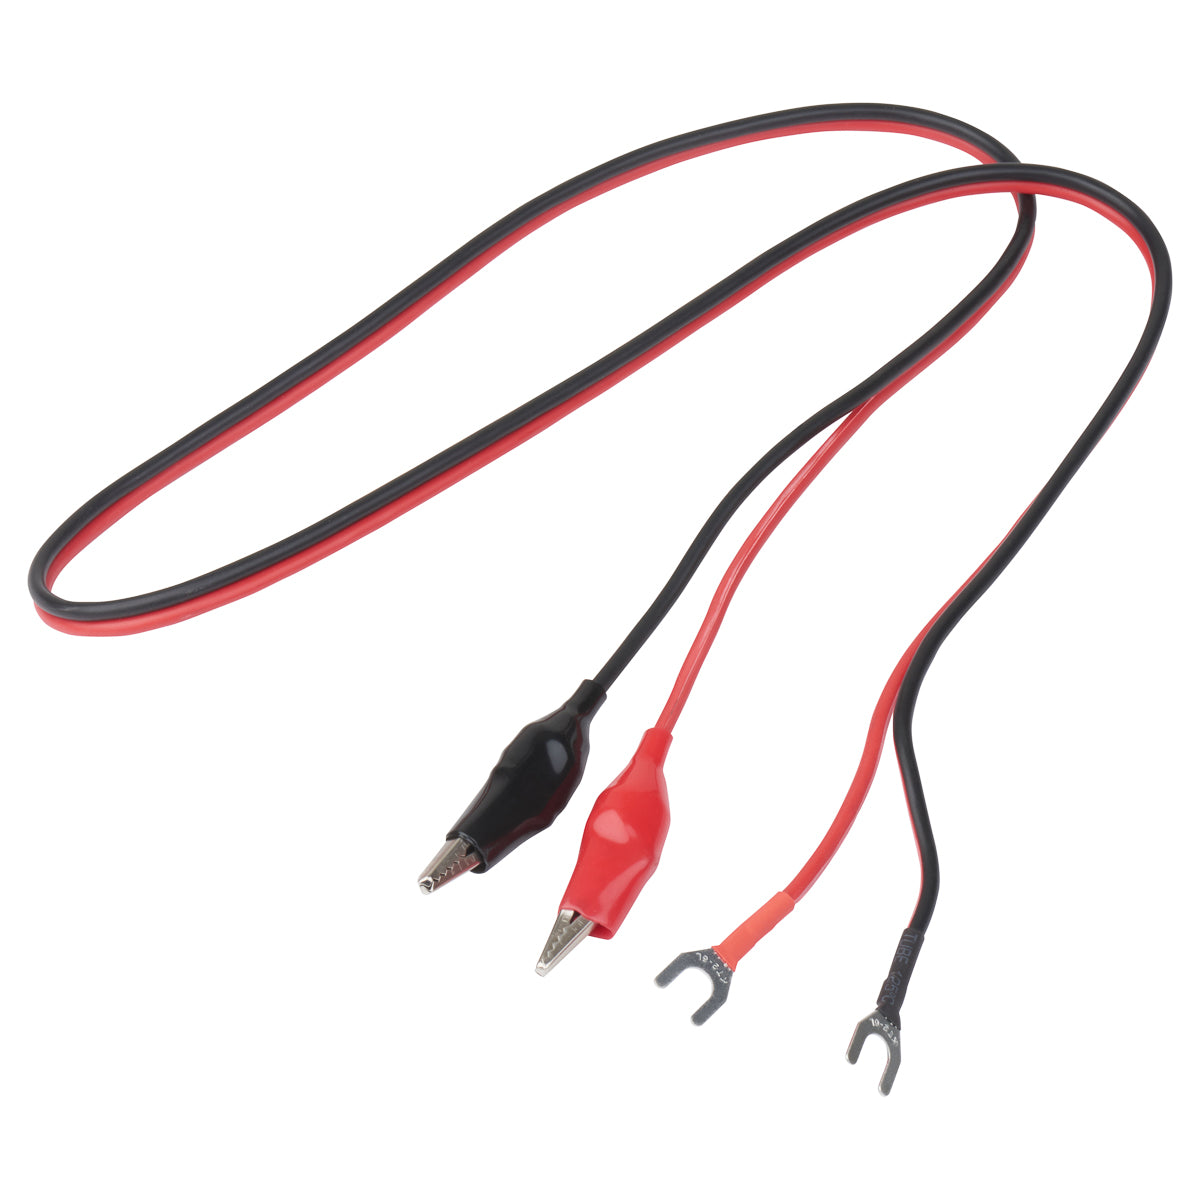 14AWG Alligator Clips to Terminal Fork - Bonded Red/Black 1M(3')-Pepetools